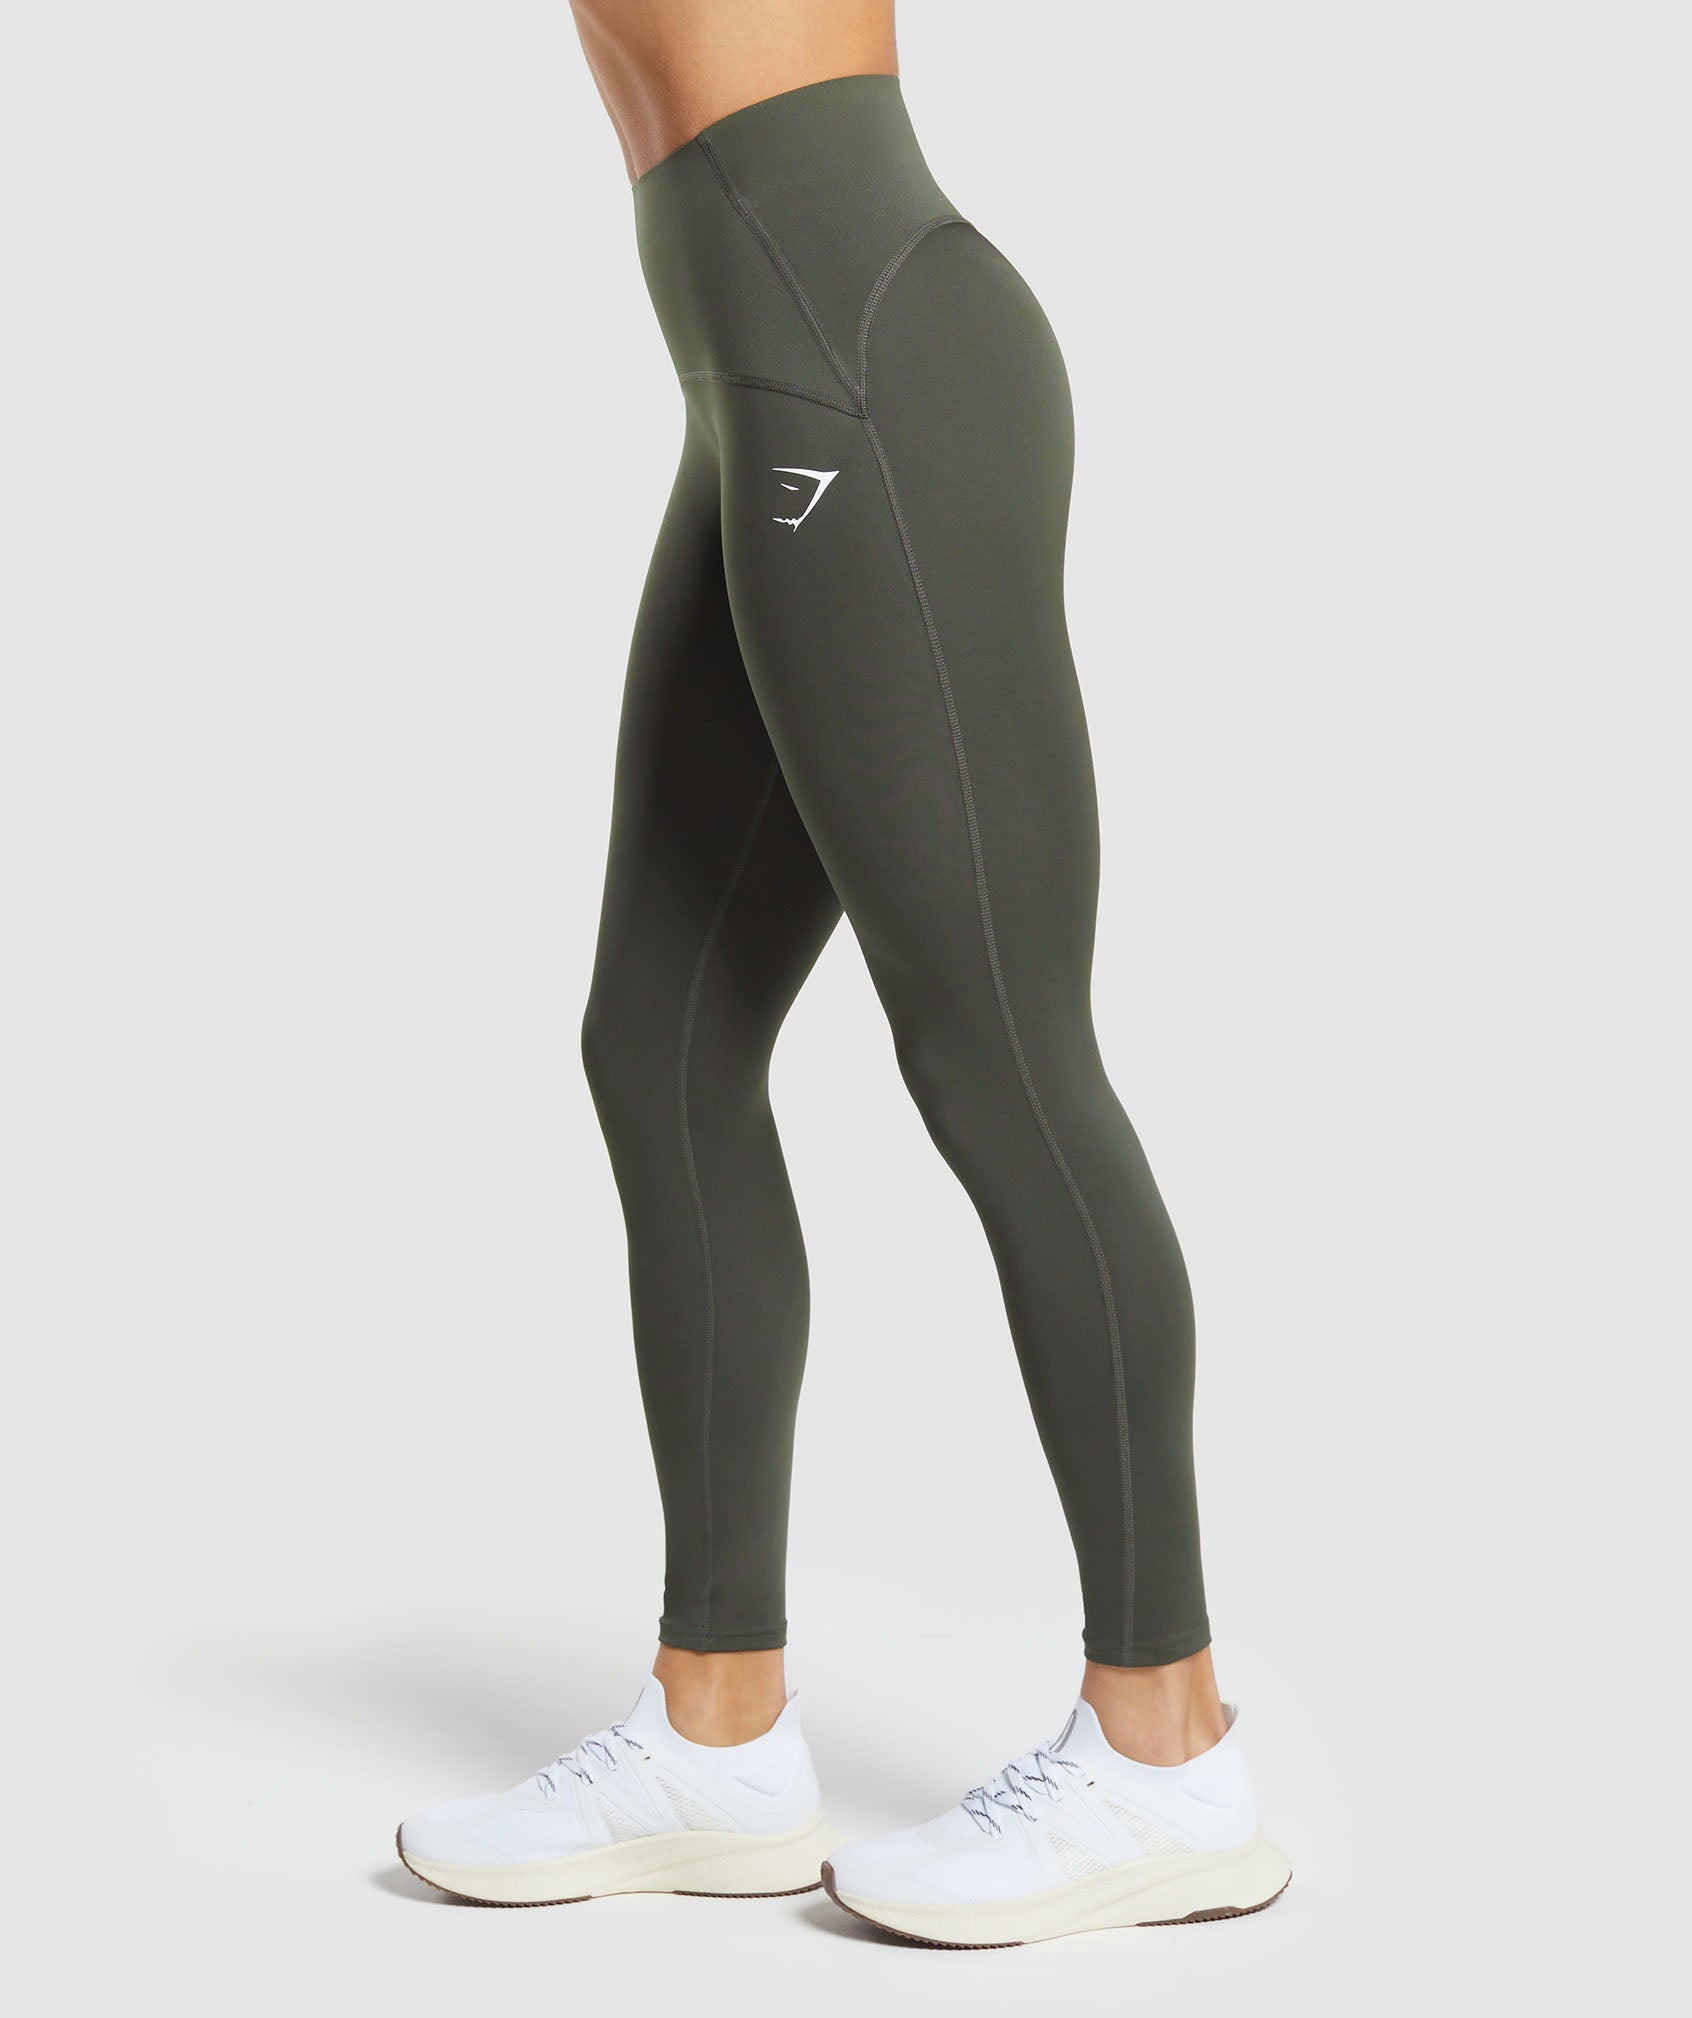 Waist Support Leggings in Strength Green - view 3